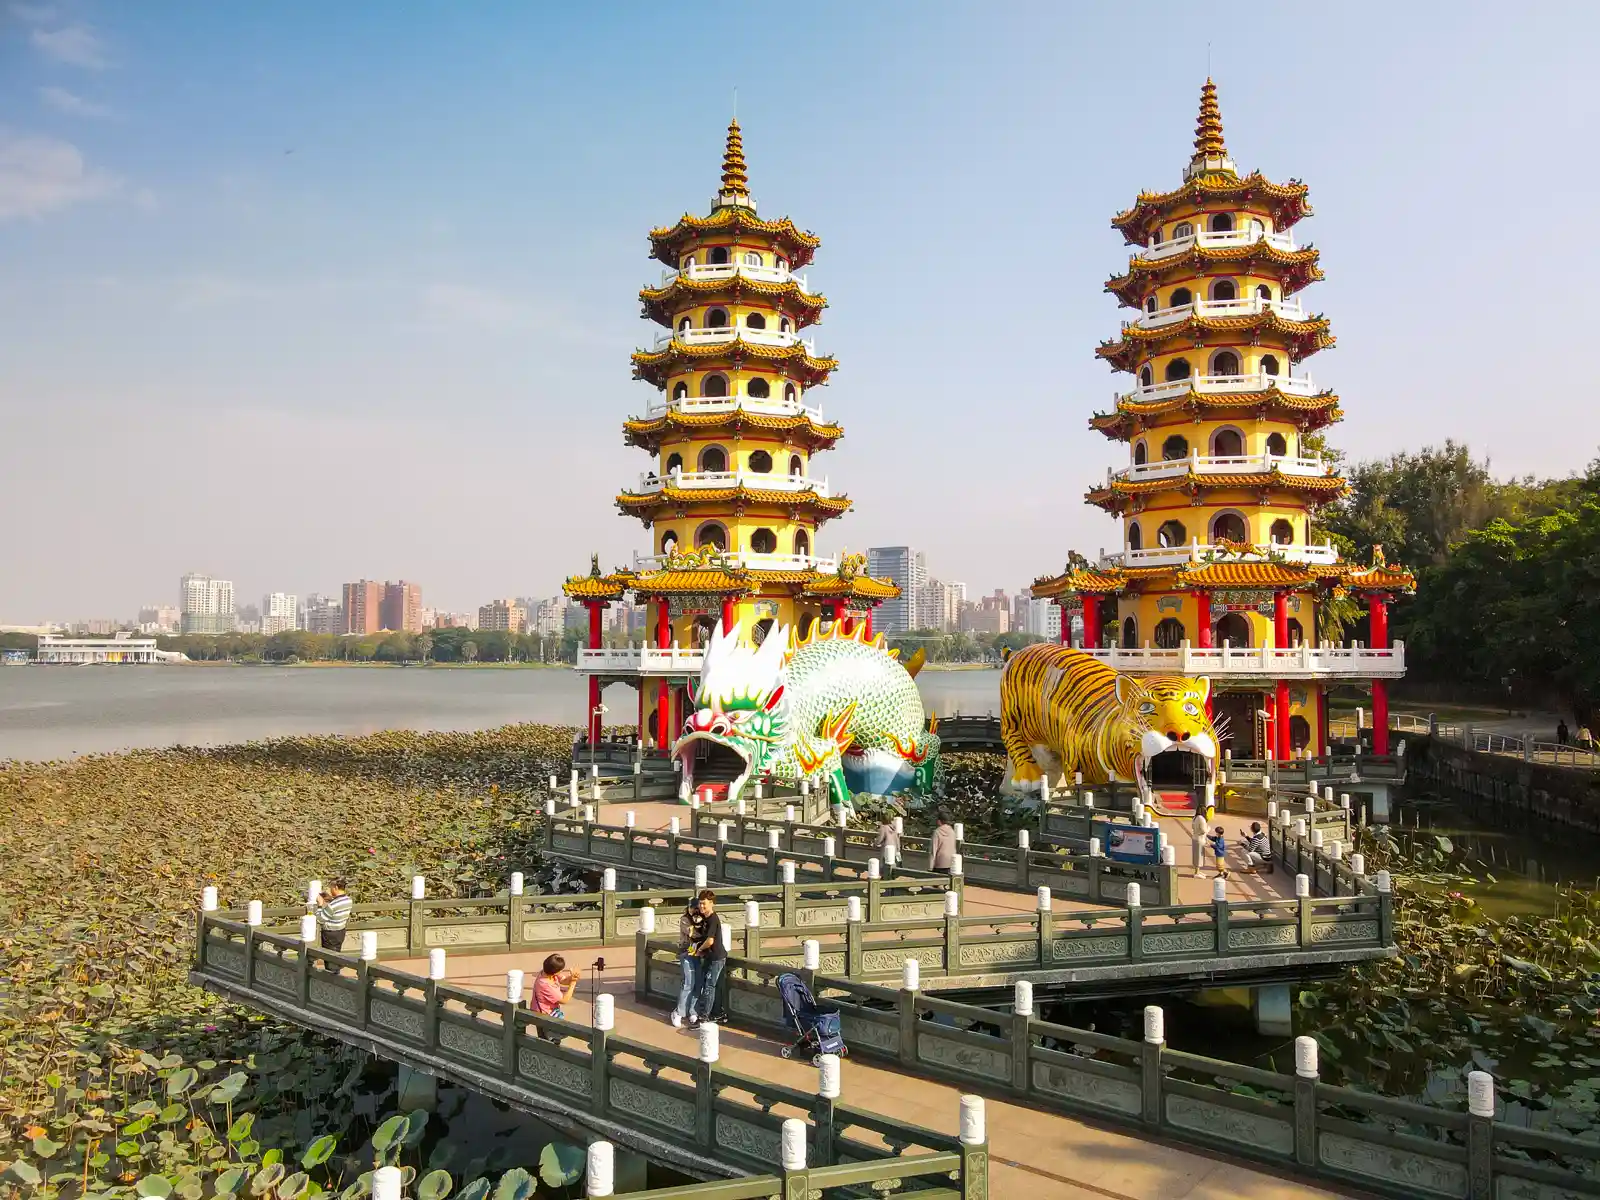 Two 7-story spires built over water are surrounded by lotuses on Lotus Pond.